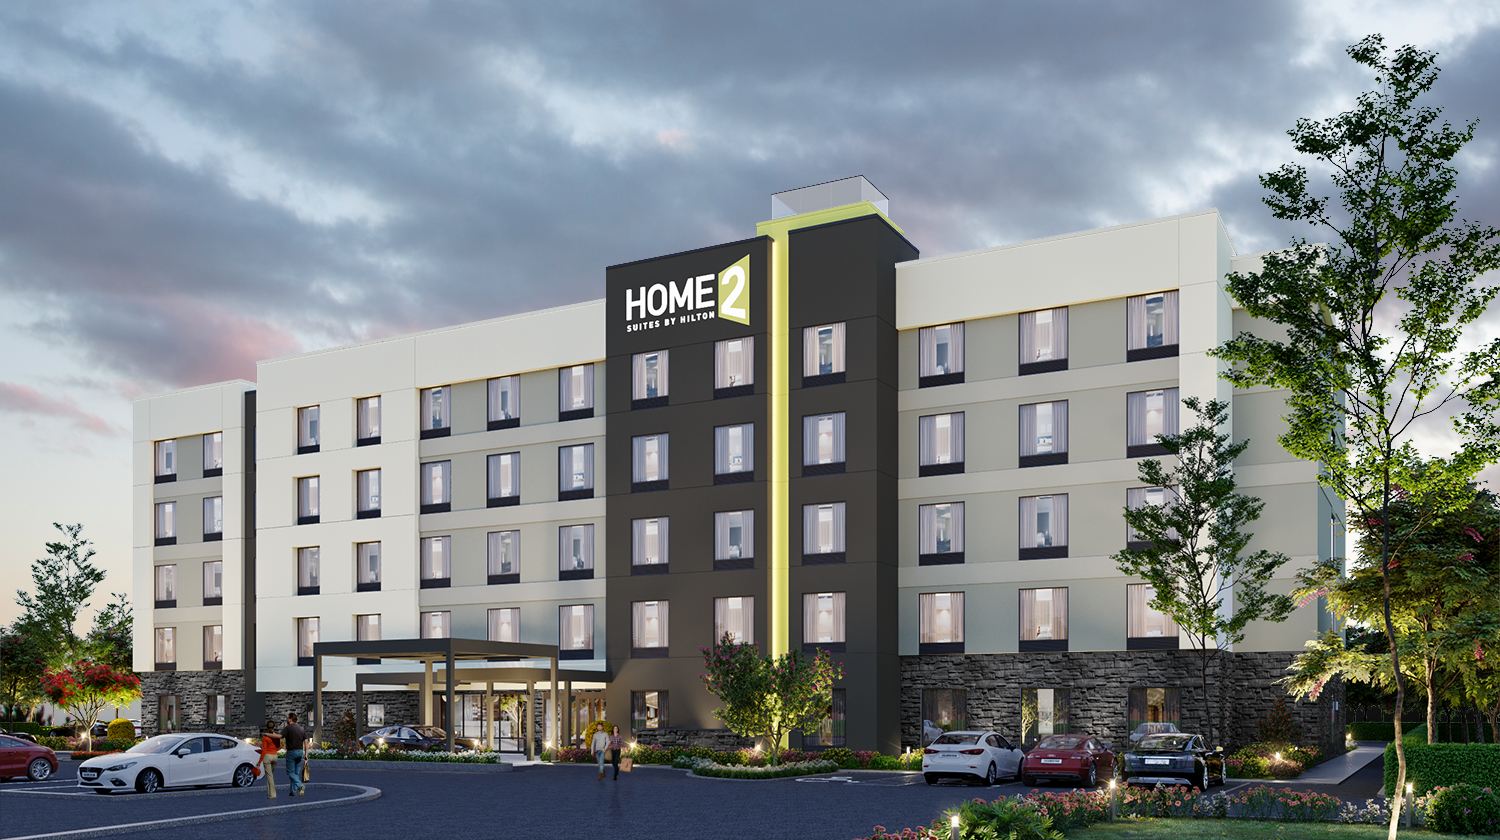 Home2 Suites Cookeville Tennessee